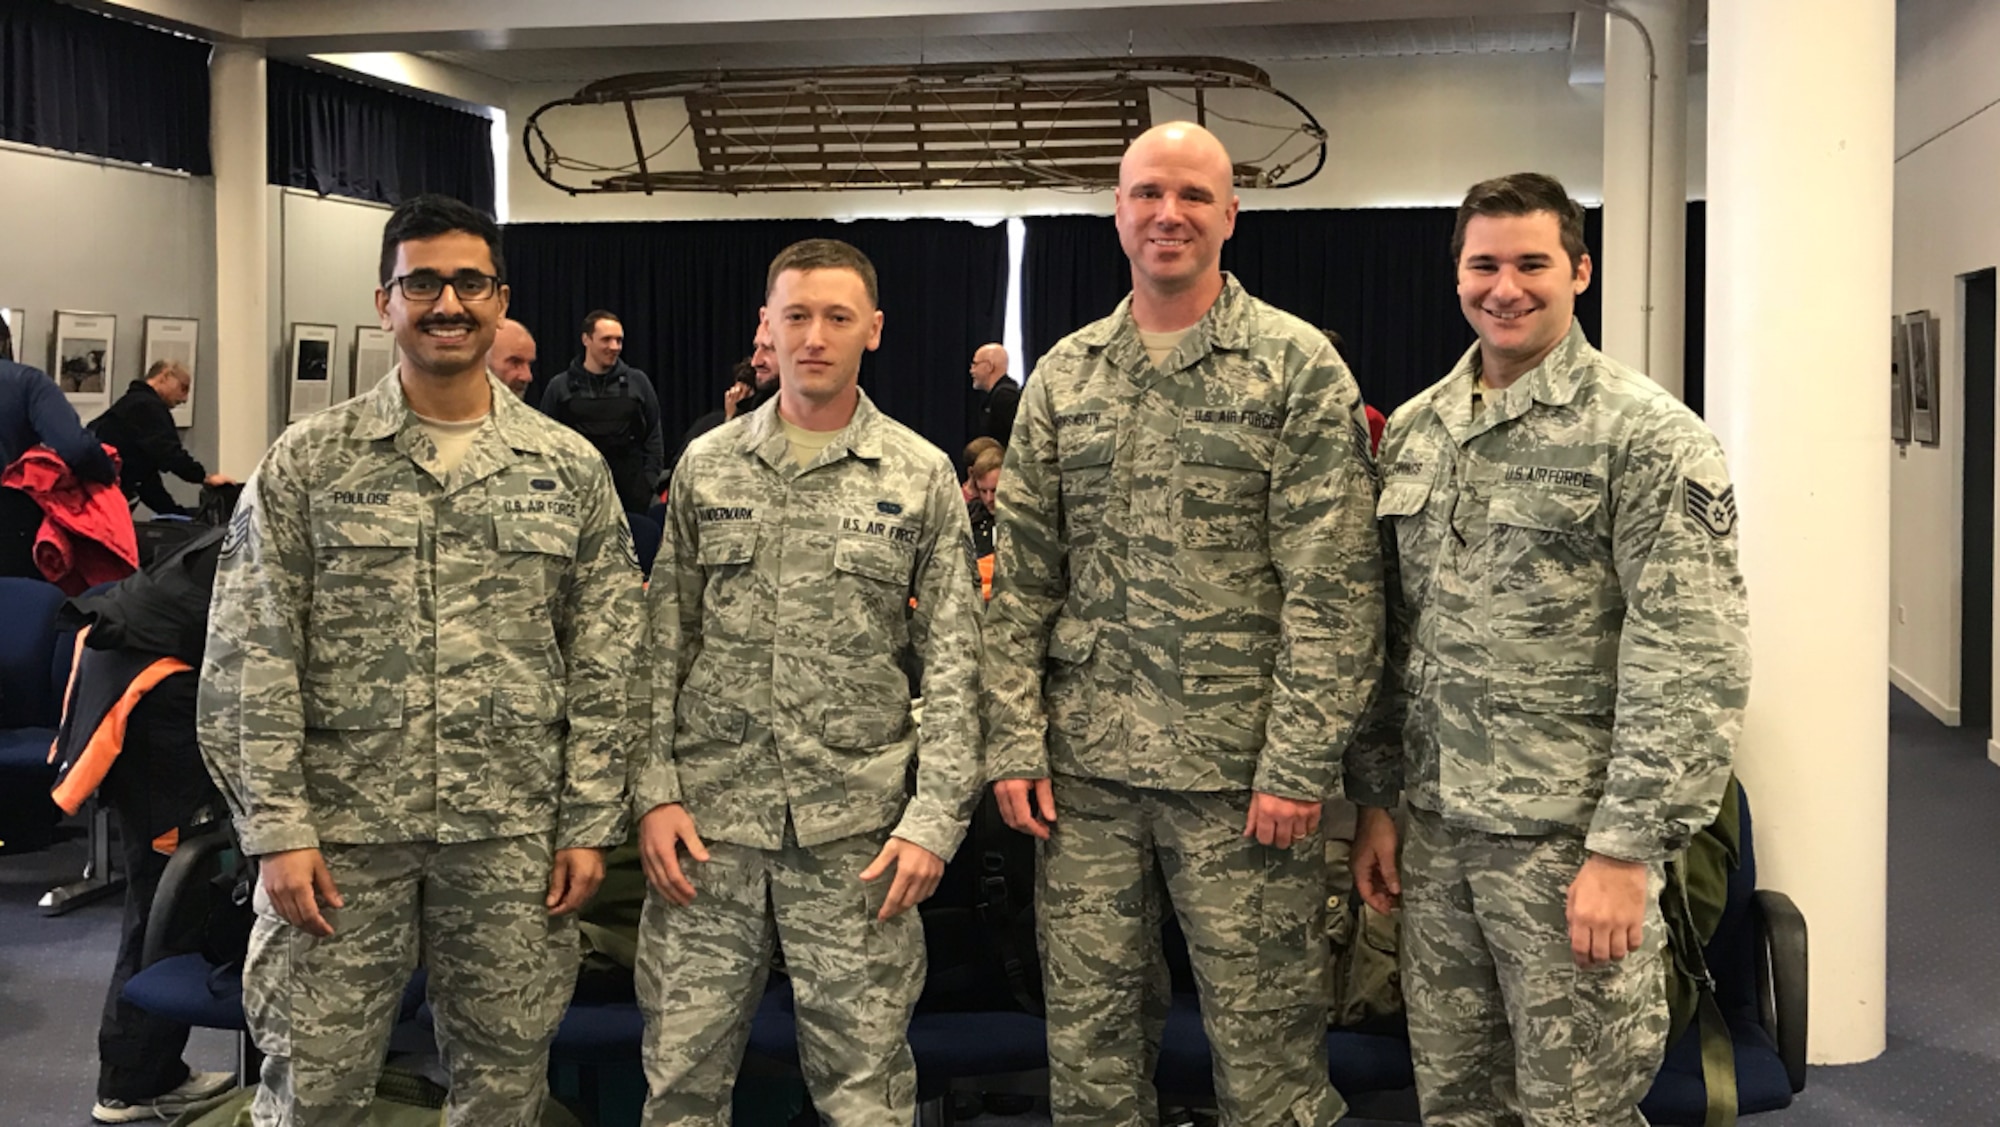 U.S. Air Force Staff Sgt. Titus Poulose (far left), Staff Sgt. Kristofer Vandermark (left), Master Sgt. Chris Farnsworth (right), and Staff Sgt. Michael Jennings (far right) of the 263rd Combat Communications Squadron, a detachment of the 145th Airlift Wing, pose for a photo while deployed to Antarctica in support of Operation Deep Freeze (ODF), at McMurdo Station, Antarctica, Dec. 1, 2018. ODF is a military mission in support of the National Science Foundation throughout the continent of Antarctica, to provide air, land, and sea support to McMurdo Station. (Courtesy Photo submitted by U.S. Air Force Master Sgt. Chris Farnsworth)